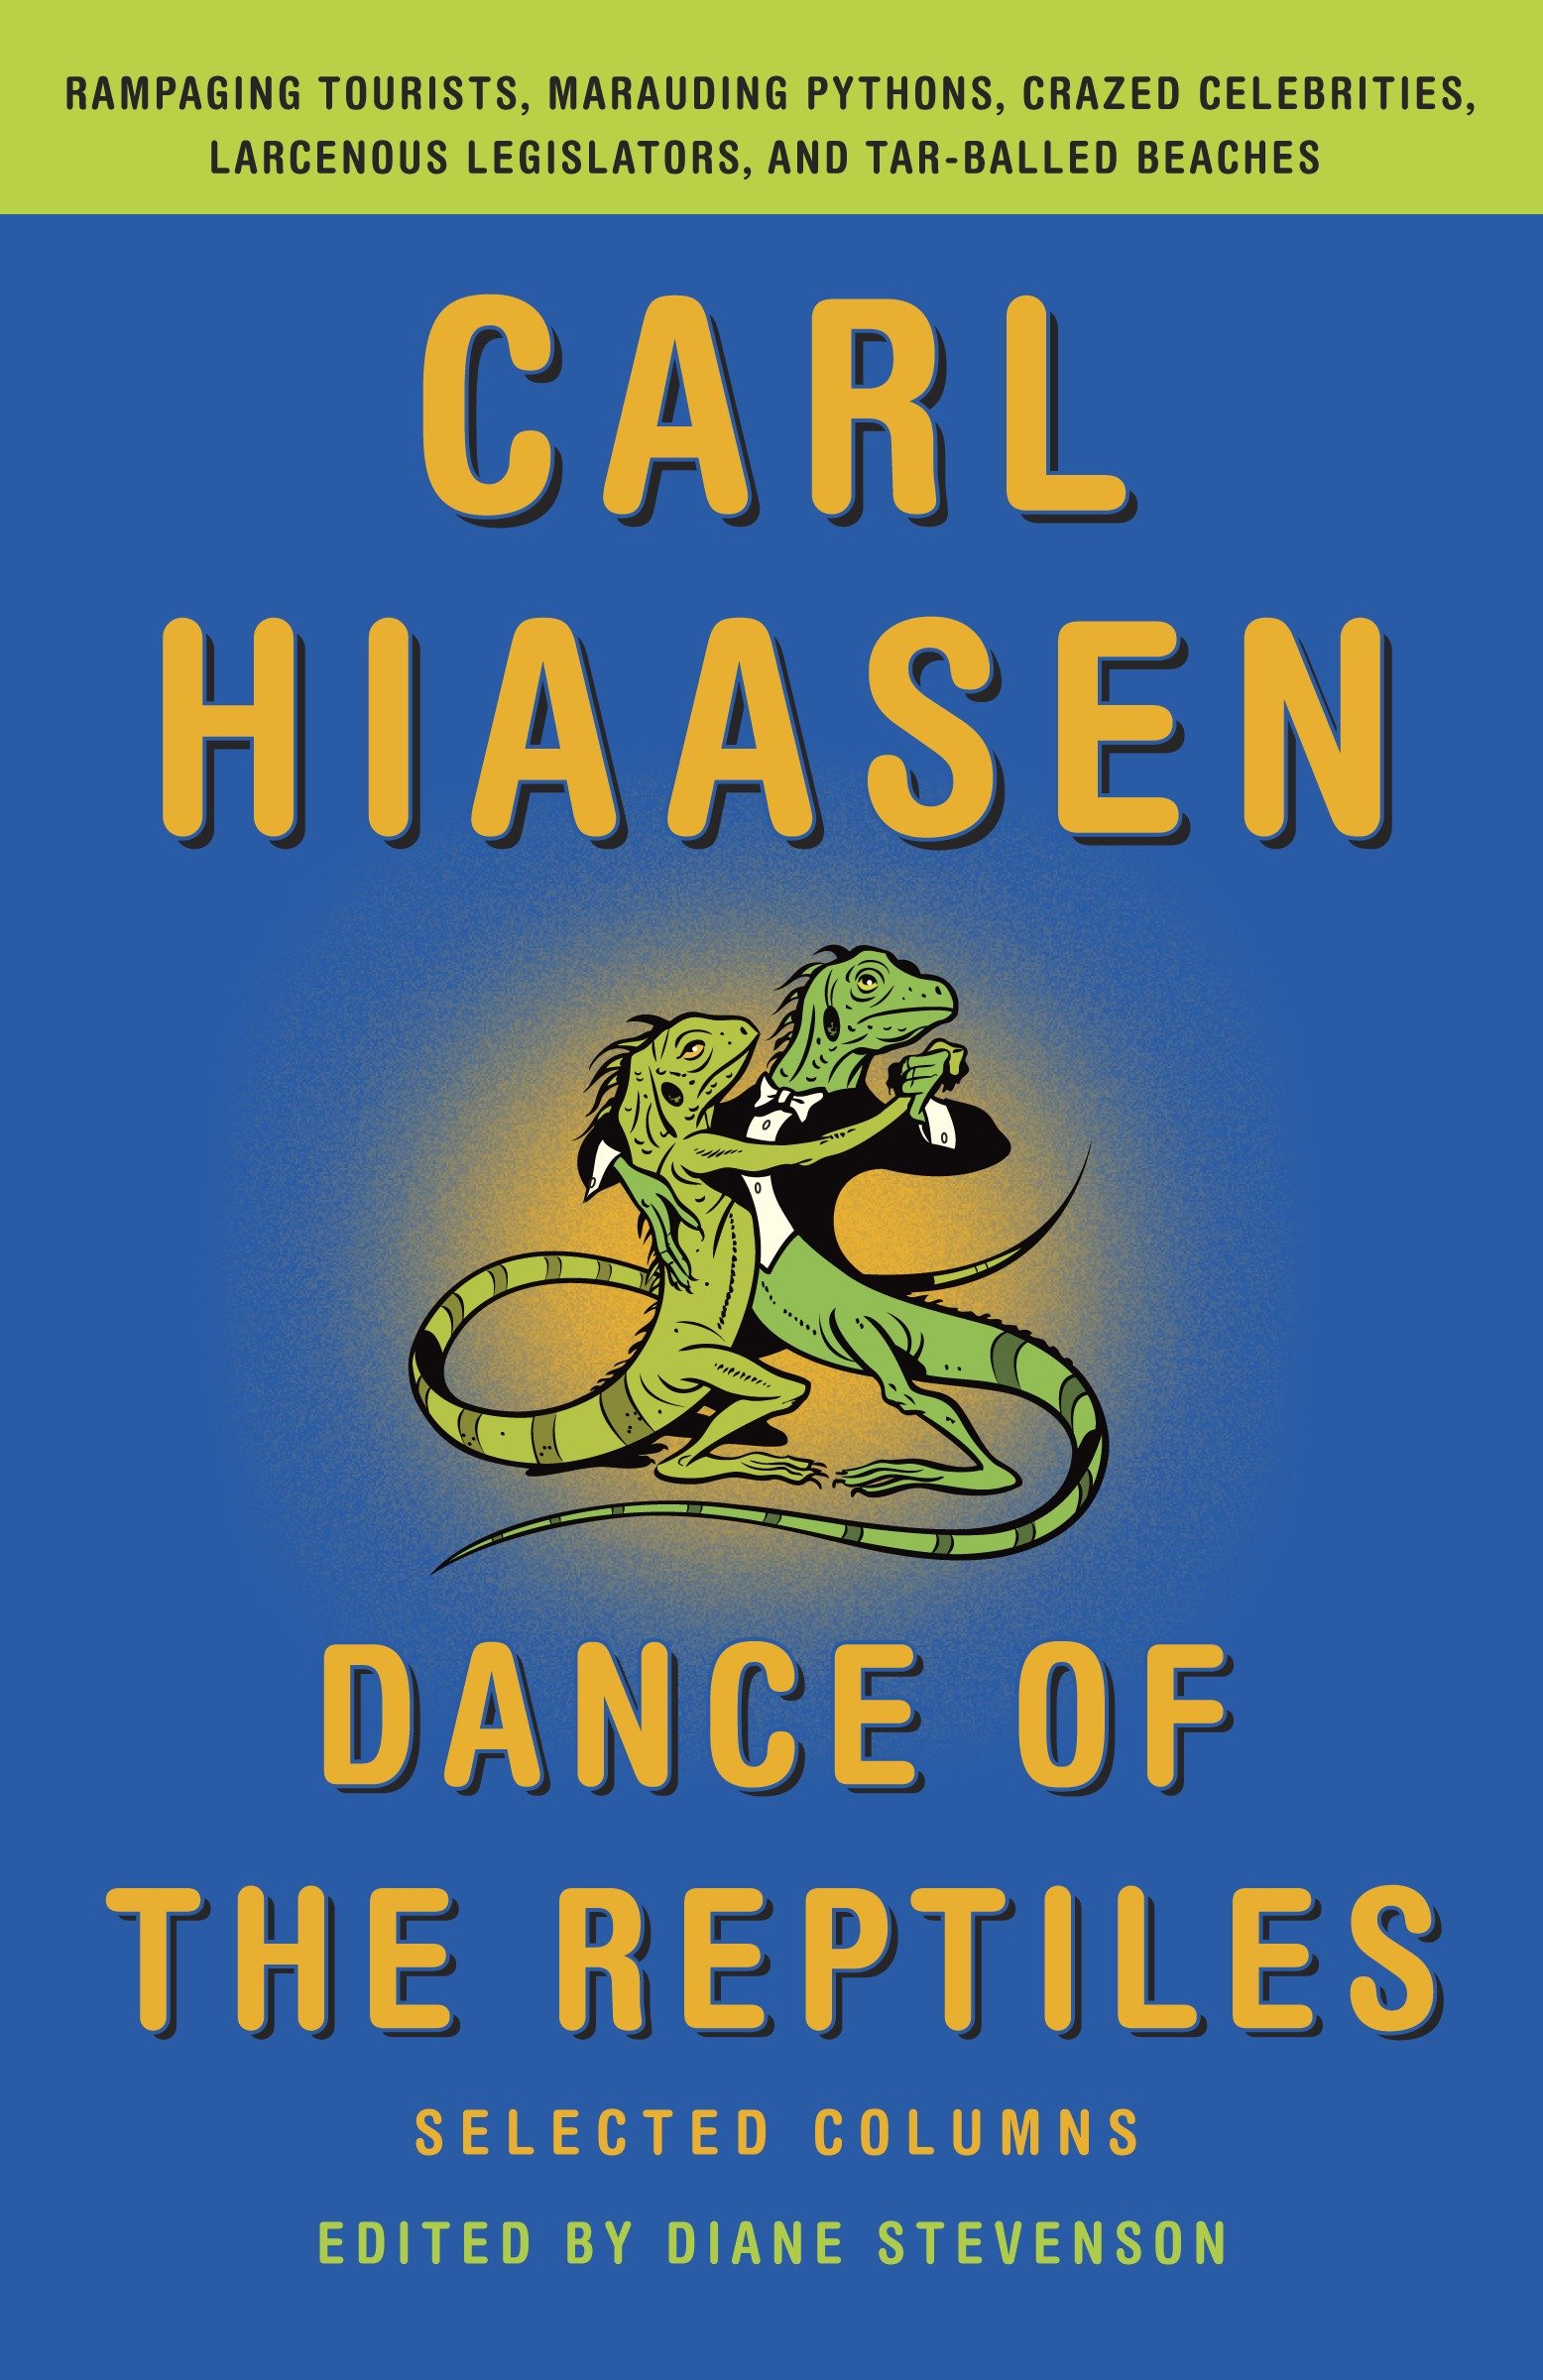 Cover image for Dance of the Reptiles [electronic resource] : Rampaging Tourists, Marauding Pythons, Larcenous Legislators, Crazed Celebrities, and Tar-Balled Beaches: Selected Columns